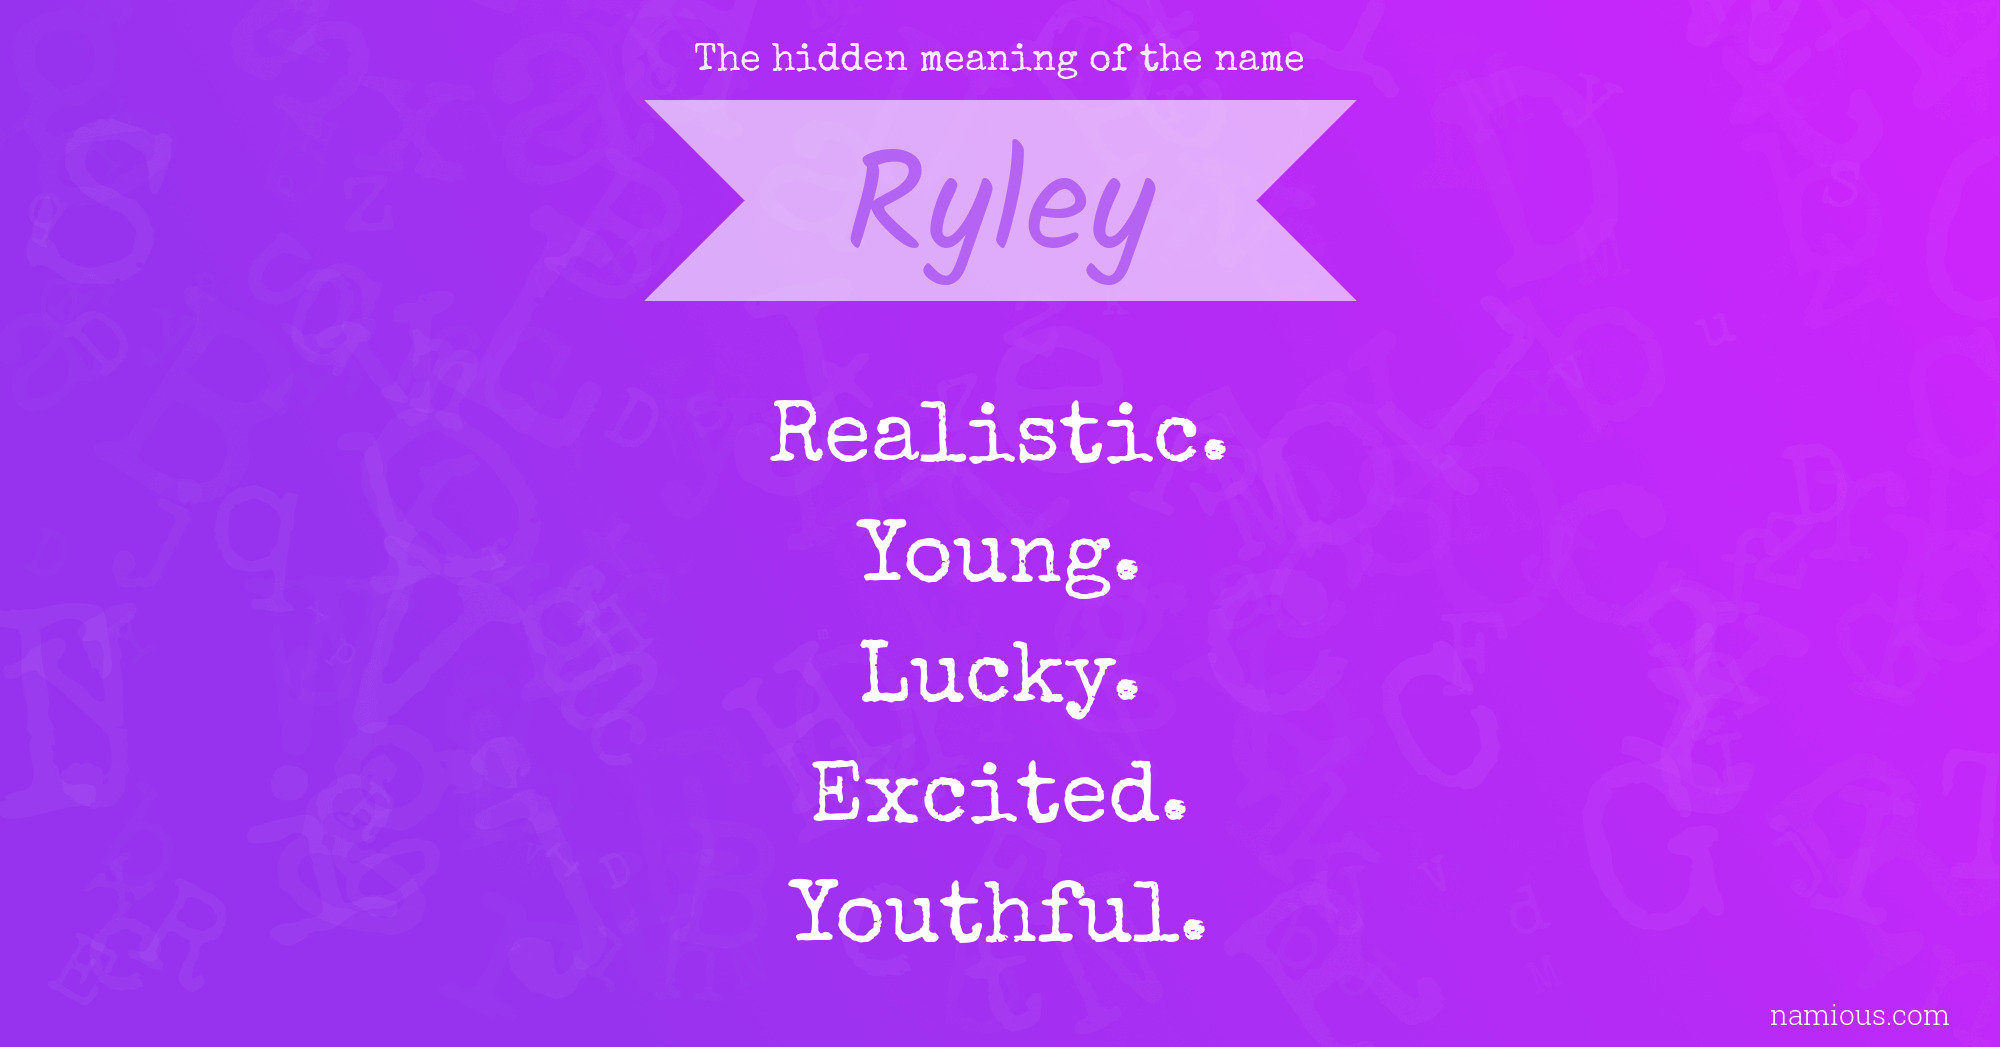 The hidden meaning of the name Ryley